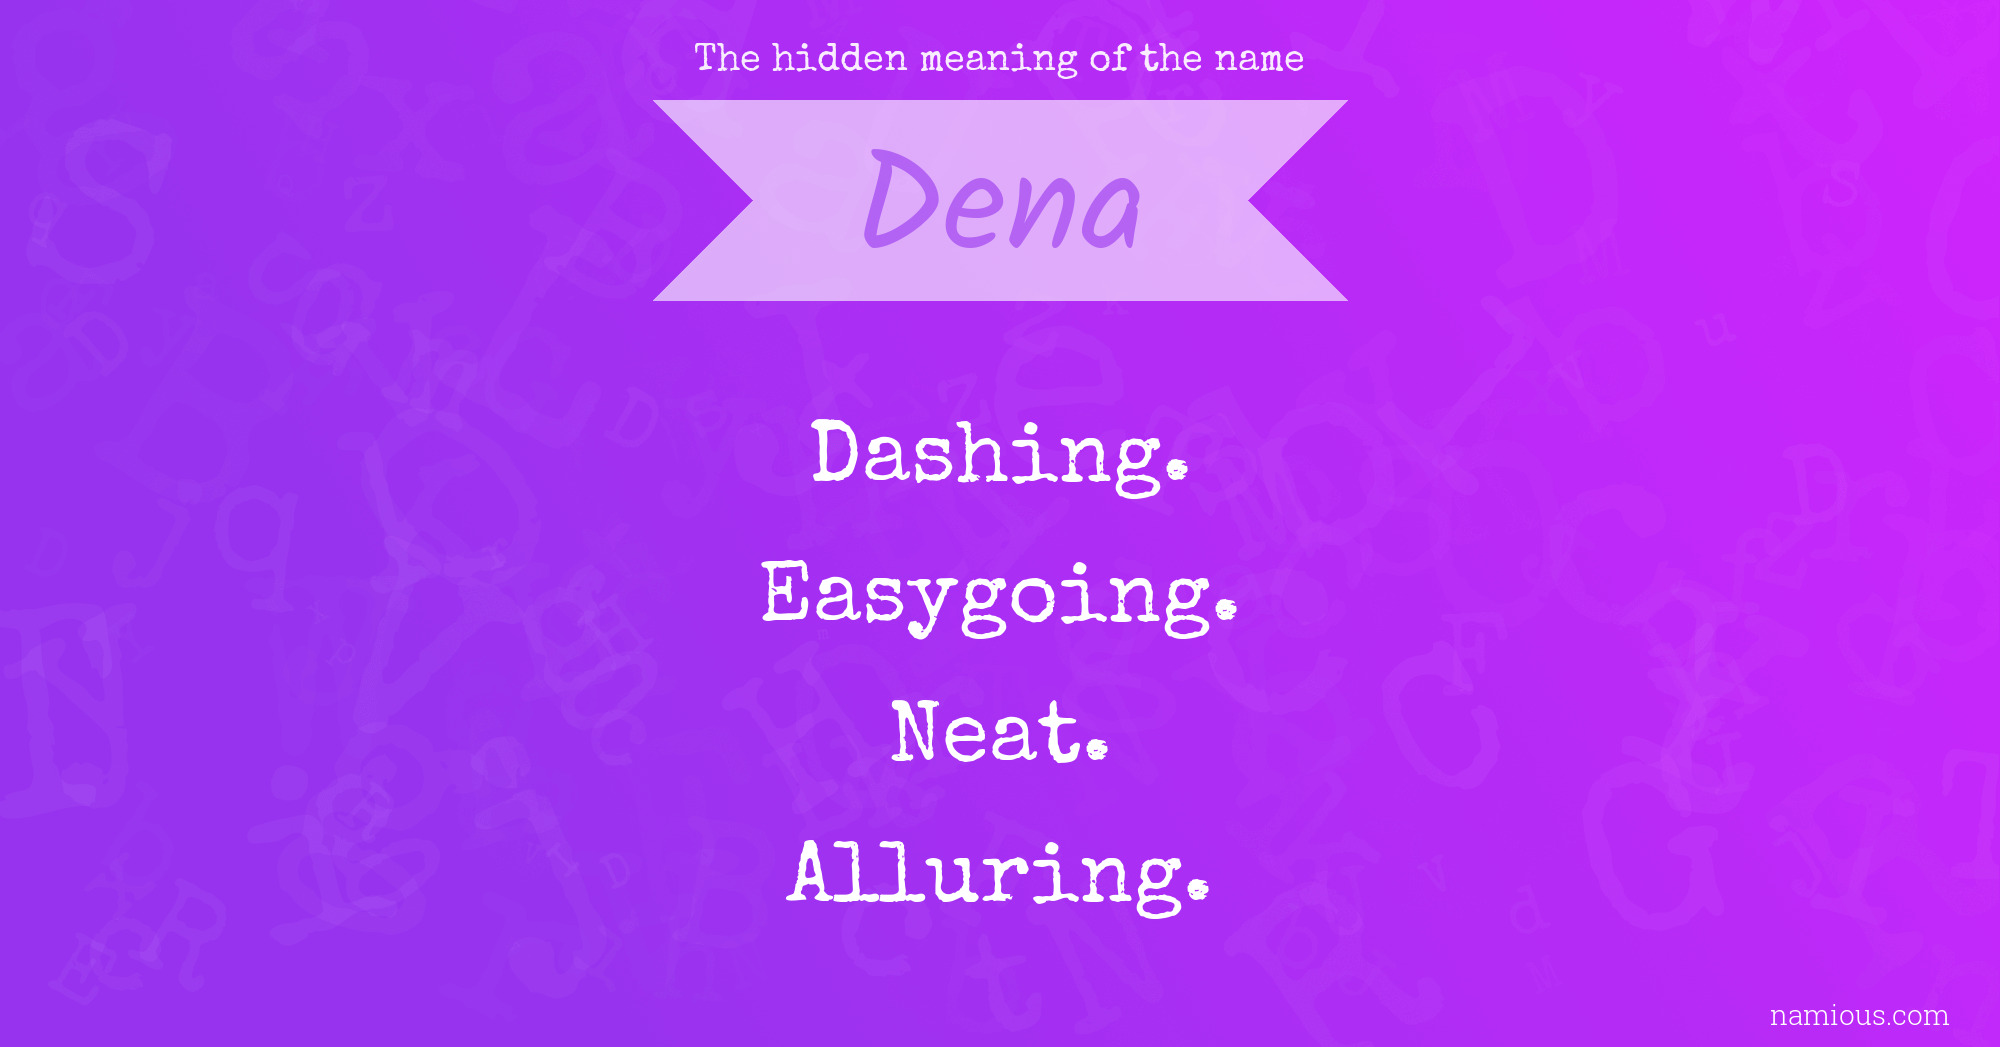 The hidden meaning of the name Dena